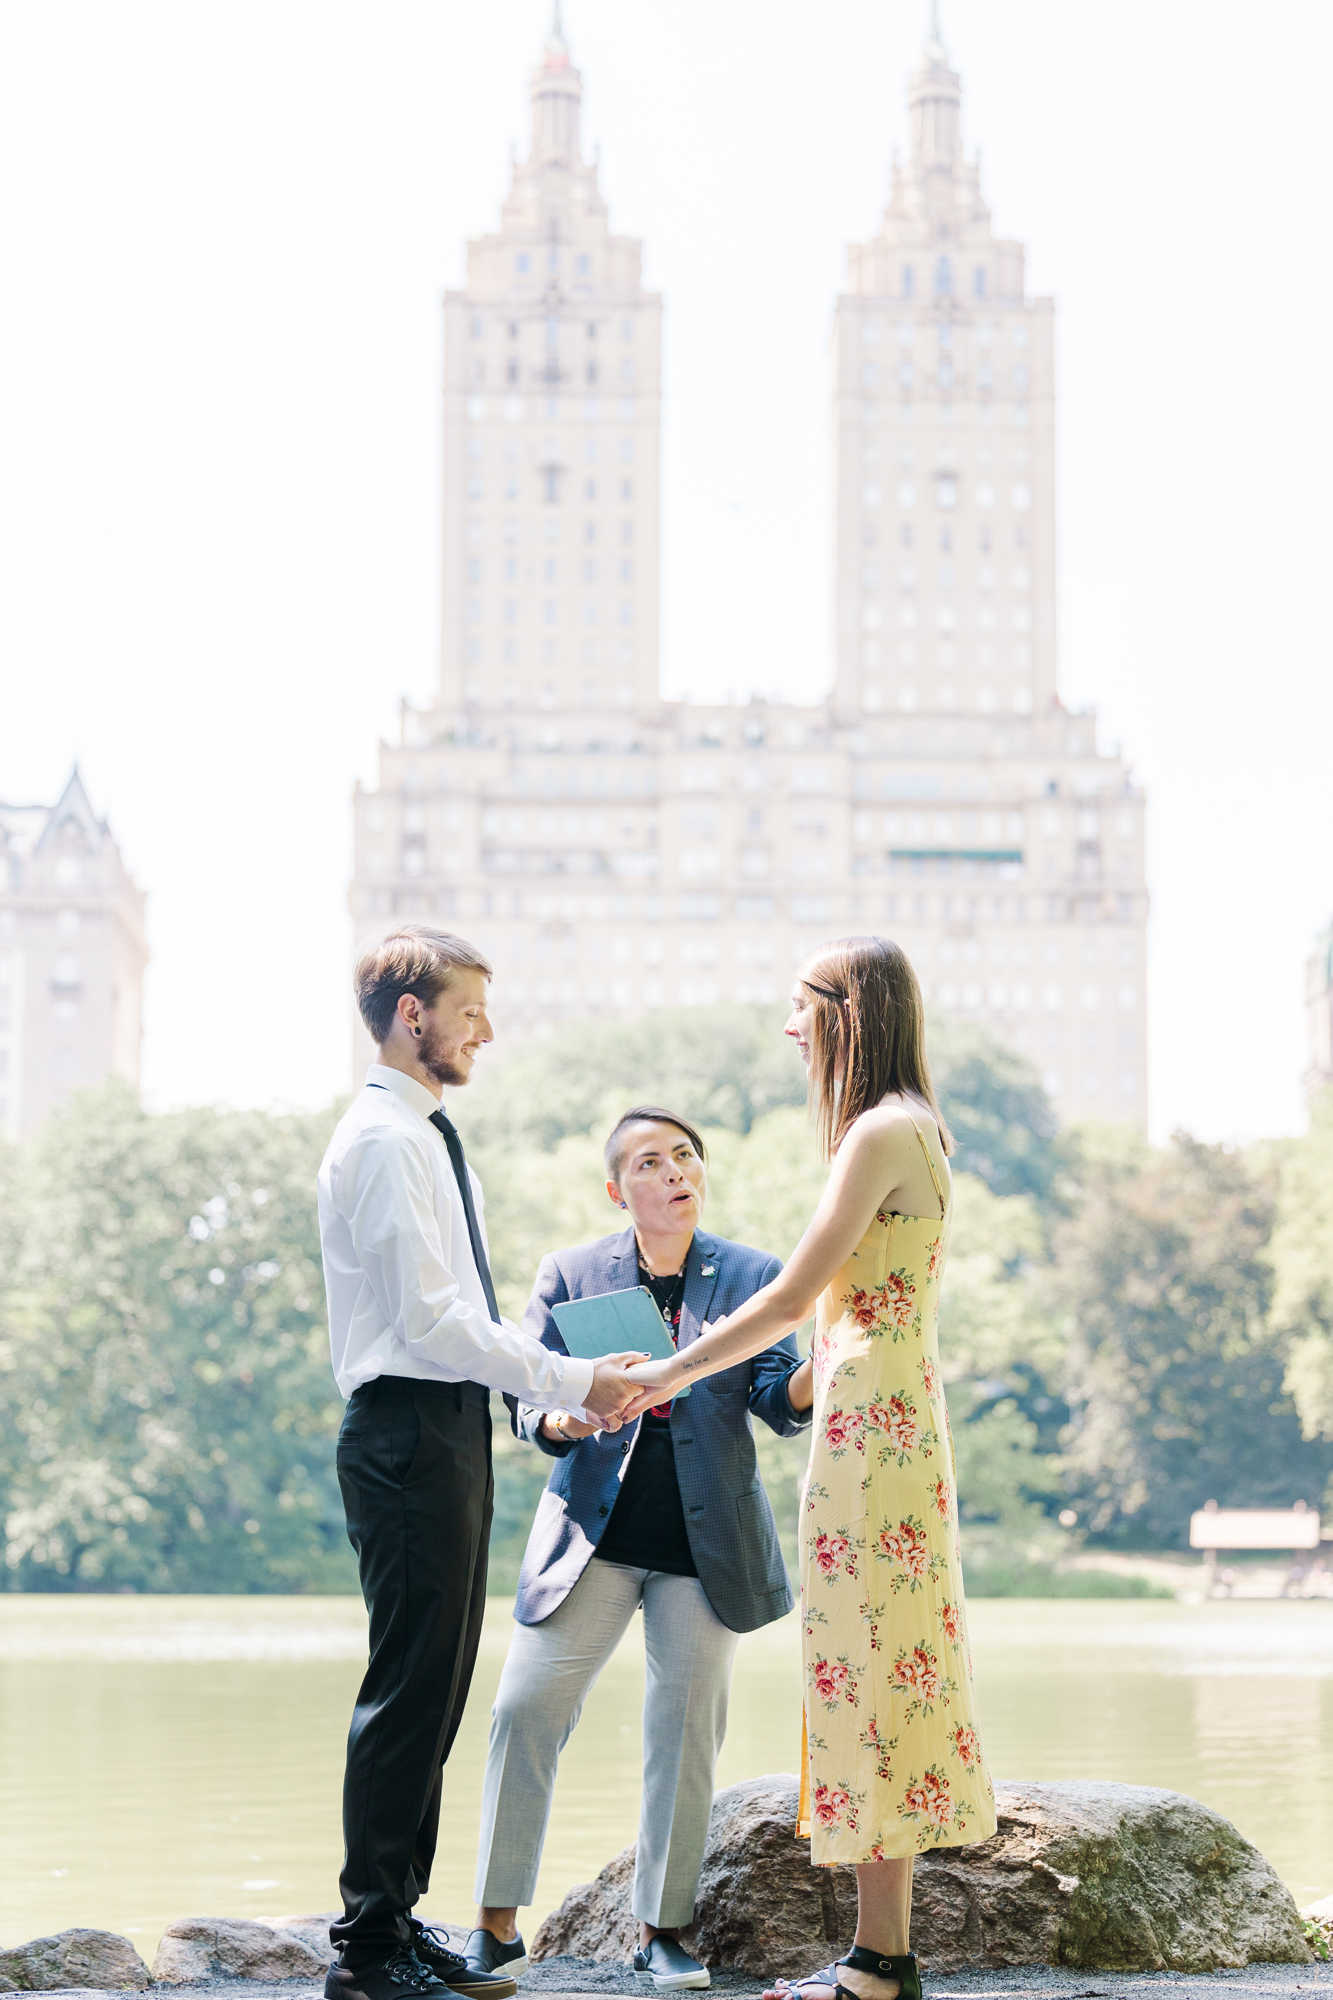 Incredible Lakeside Central Park Elopement